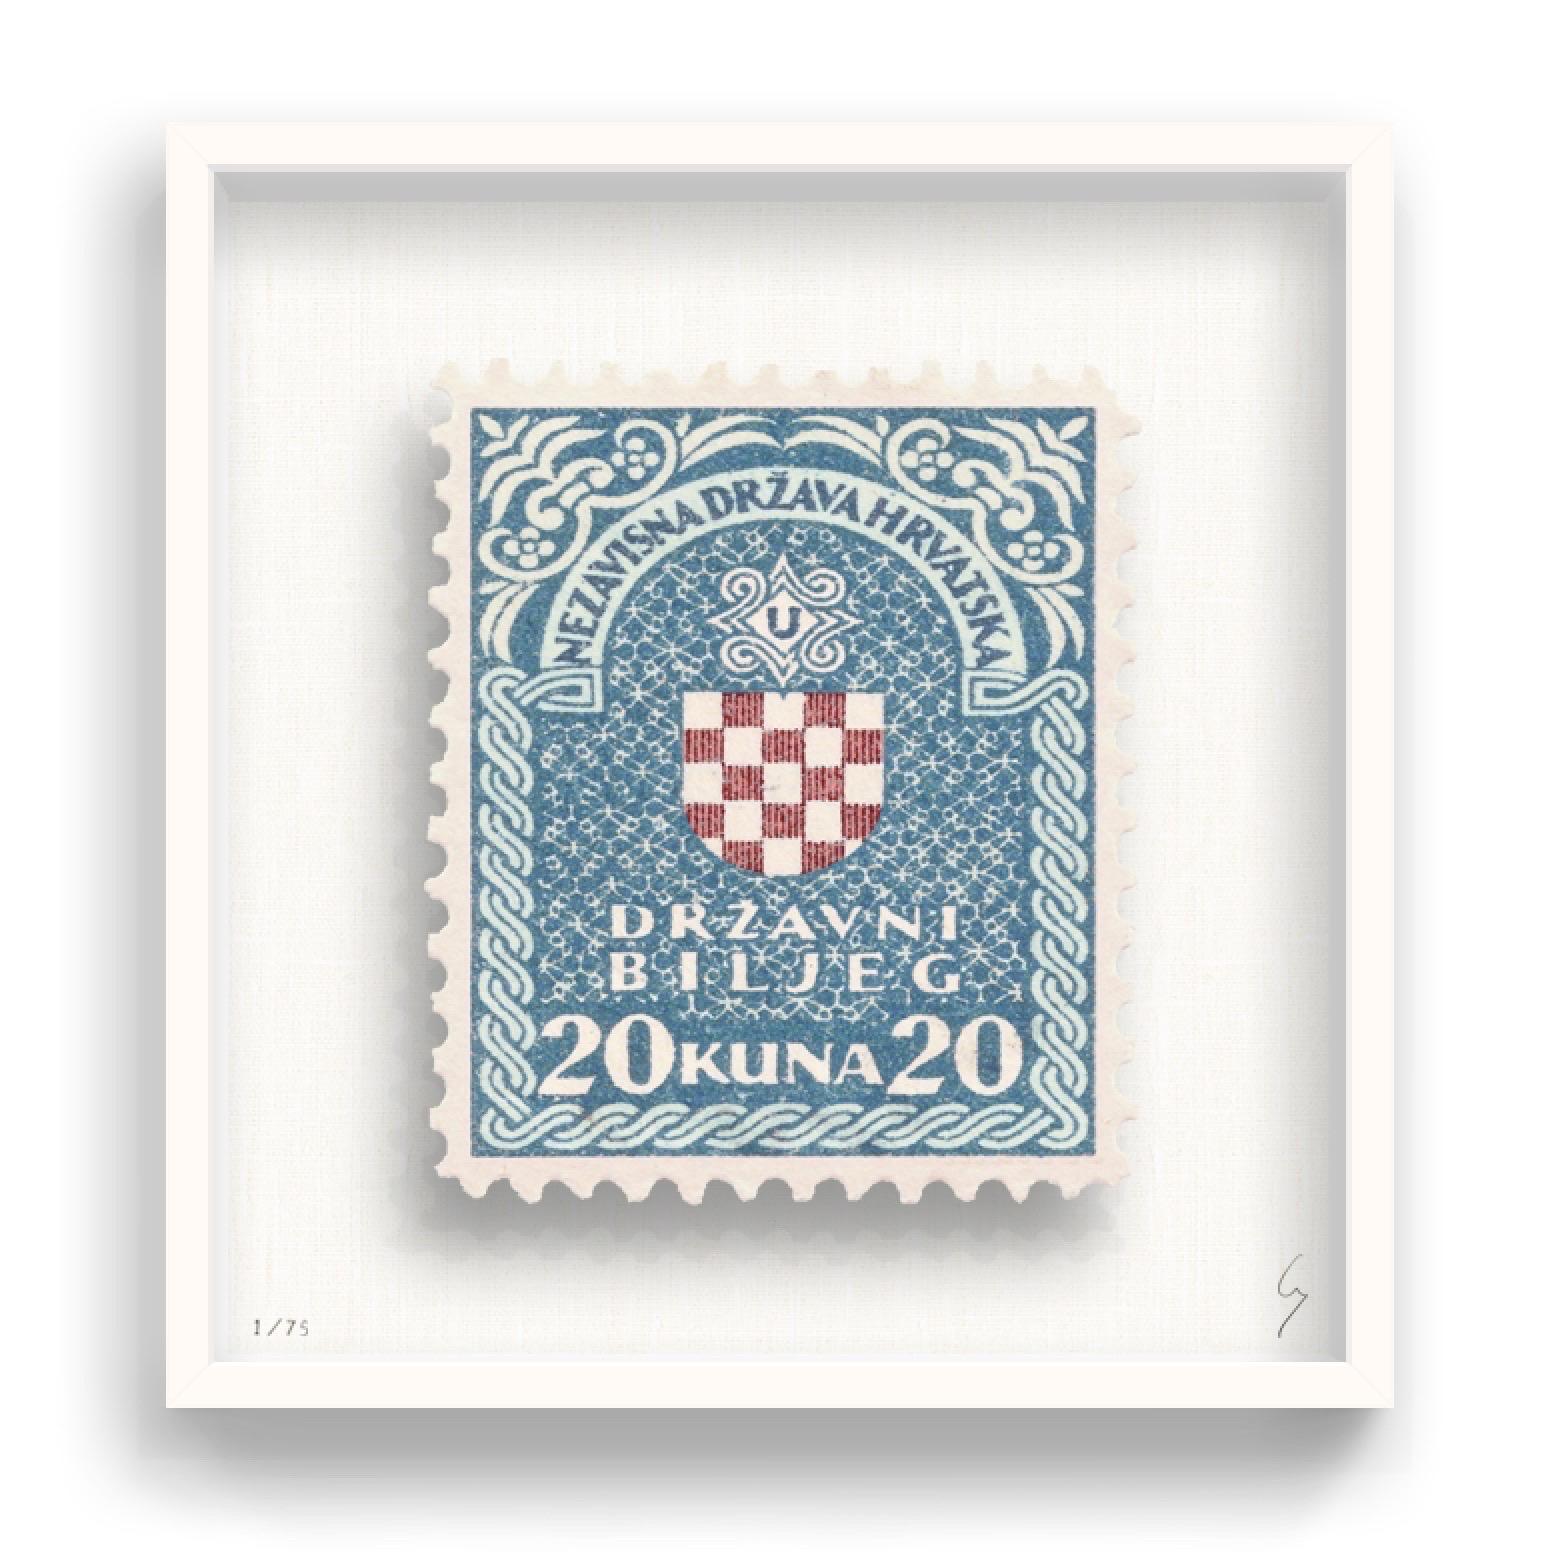 Guy Gee, Croatia (medium)

Hand-engraved print on 350gsm on G.F Smith card
53 x 56cm (20 4/5 x 22 2/5 in)
Frame included 
Edition of 75 

Each artwork by Guy had been digitally reimagined from an original postage stamp. Cut out and finished by hand,